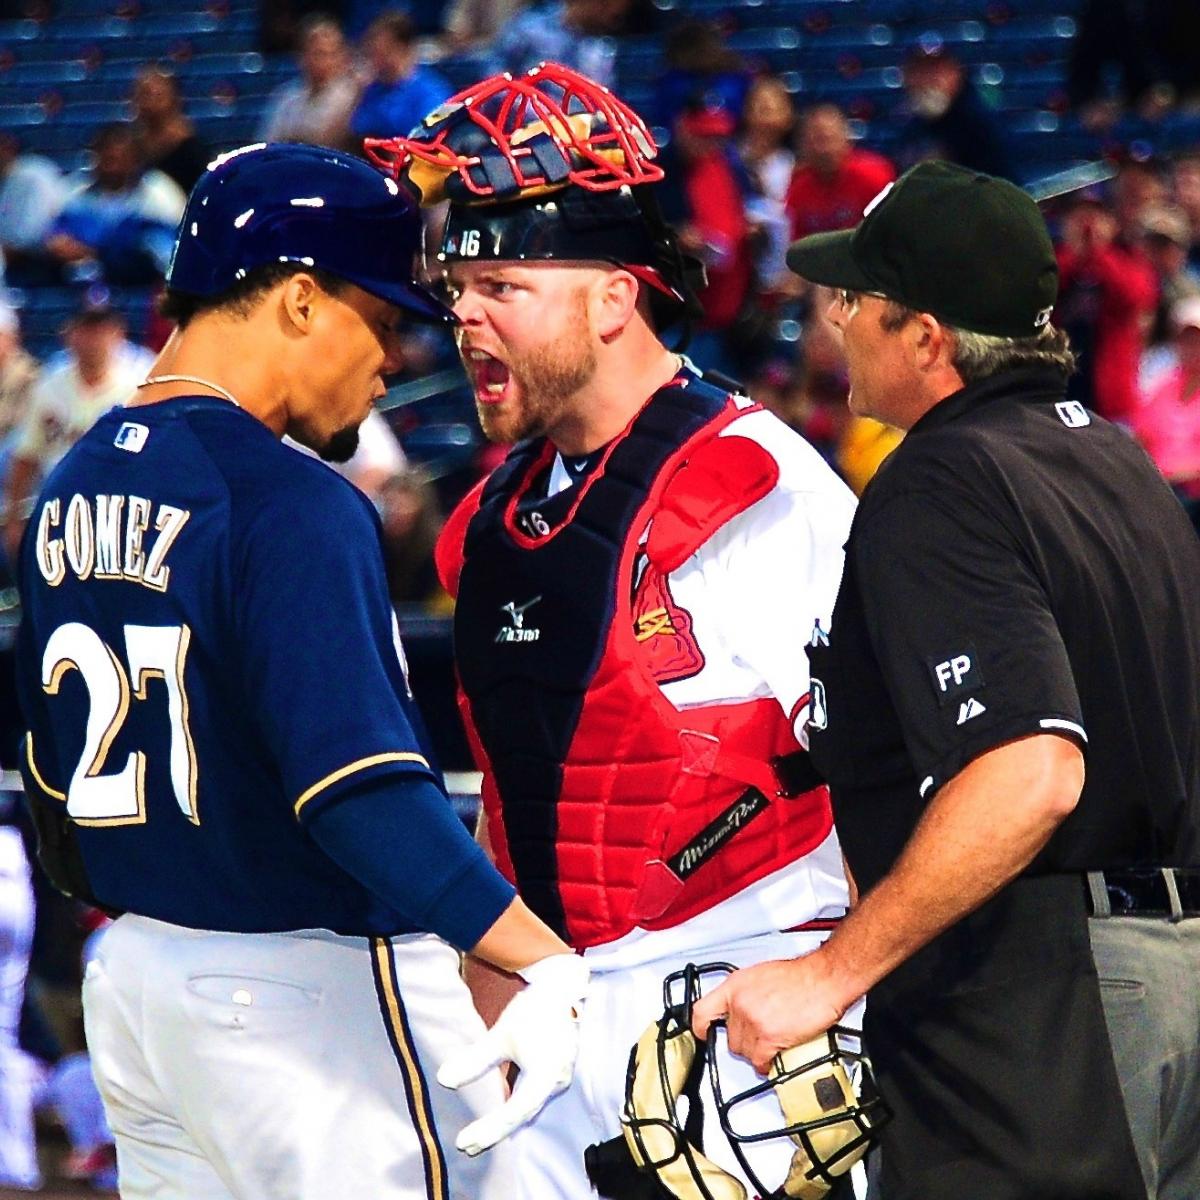 Brewers battle to 2014 Majors championship